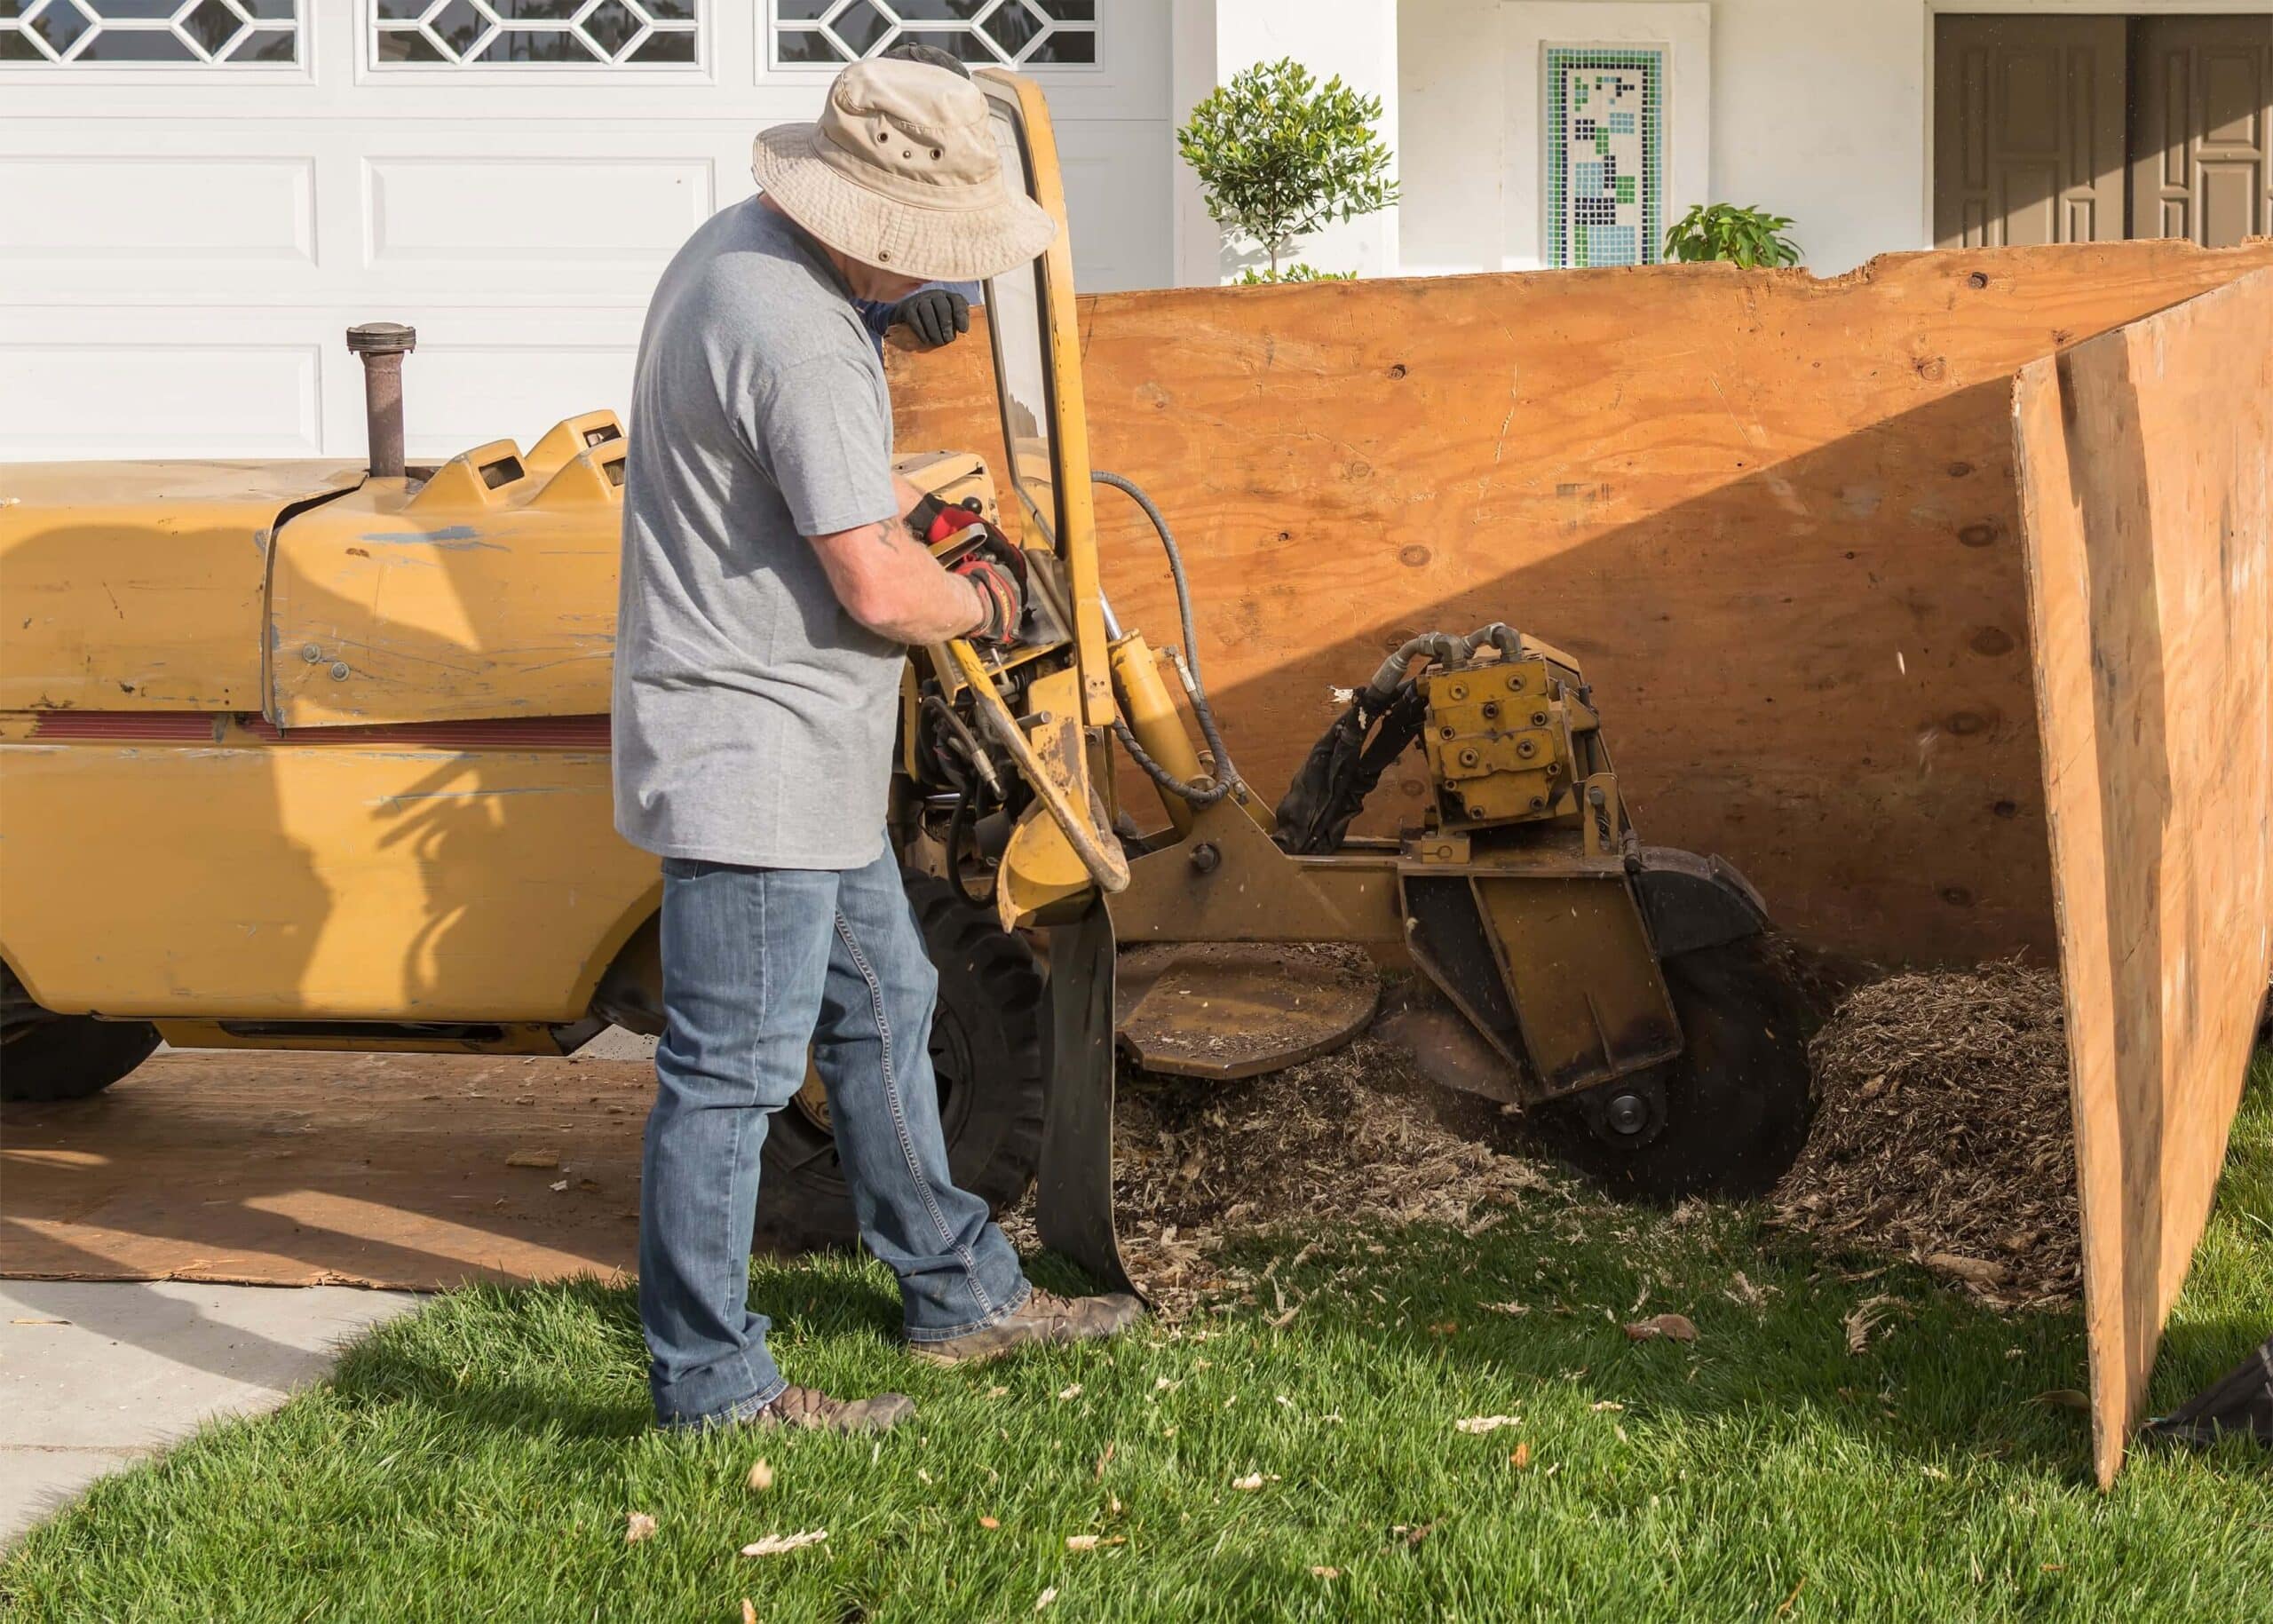 Worker using a machine to perform a stump grinding service.